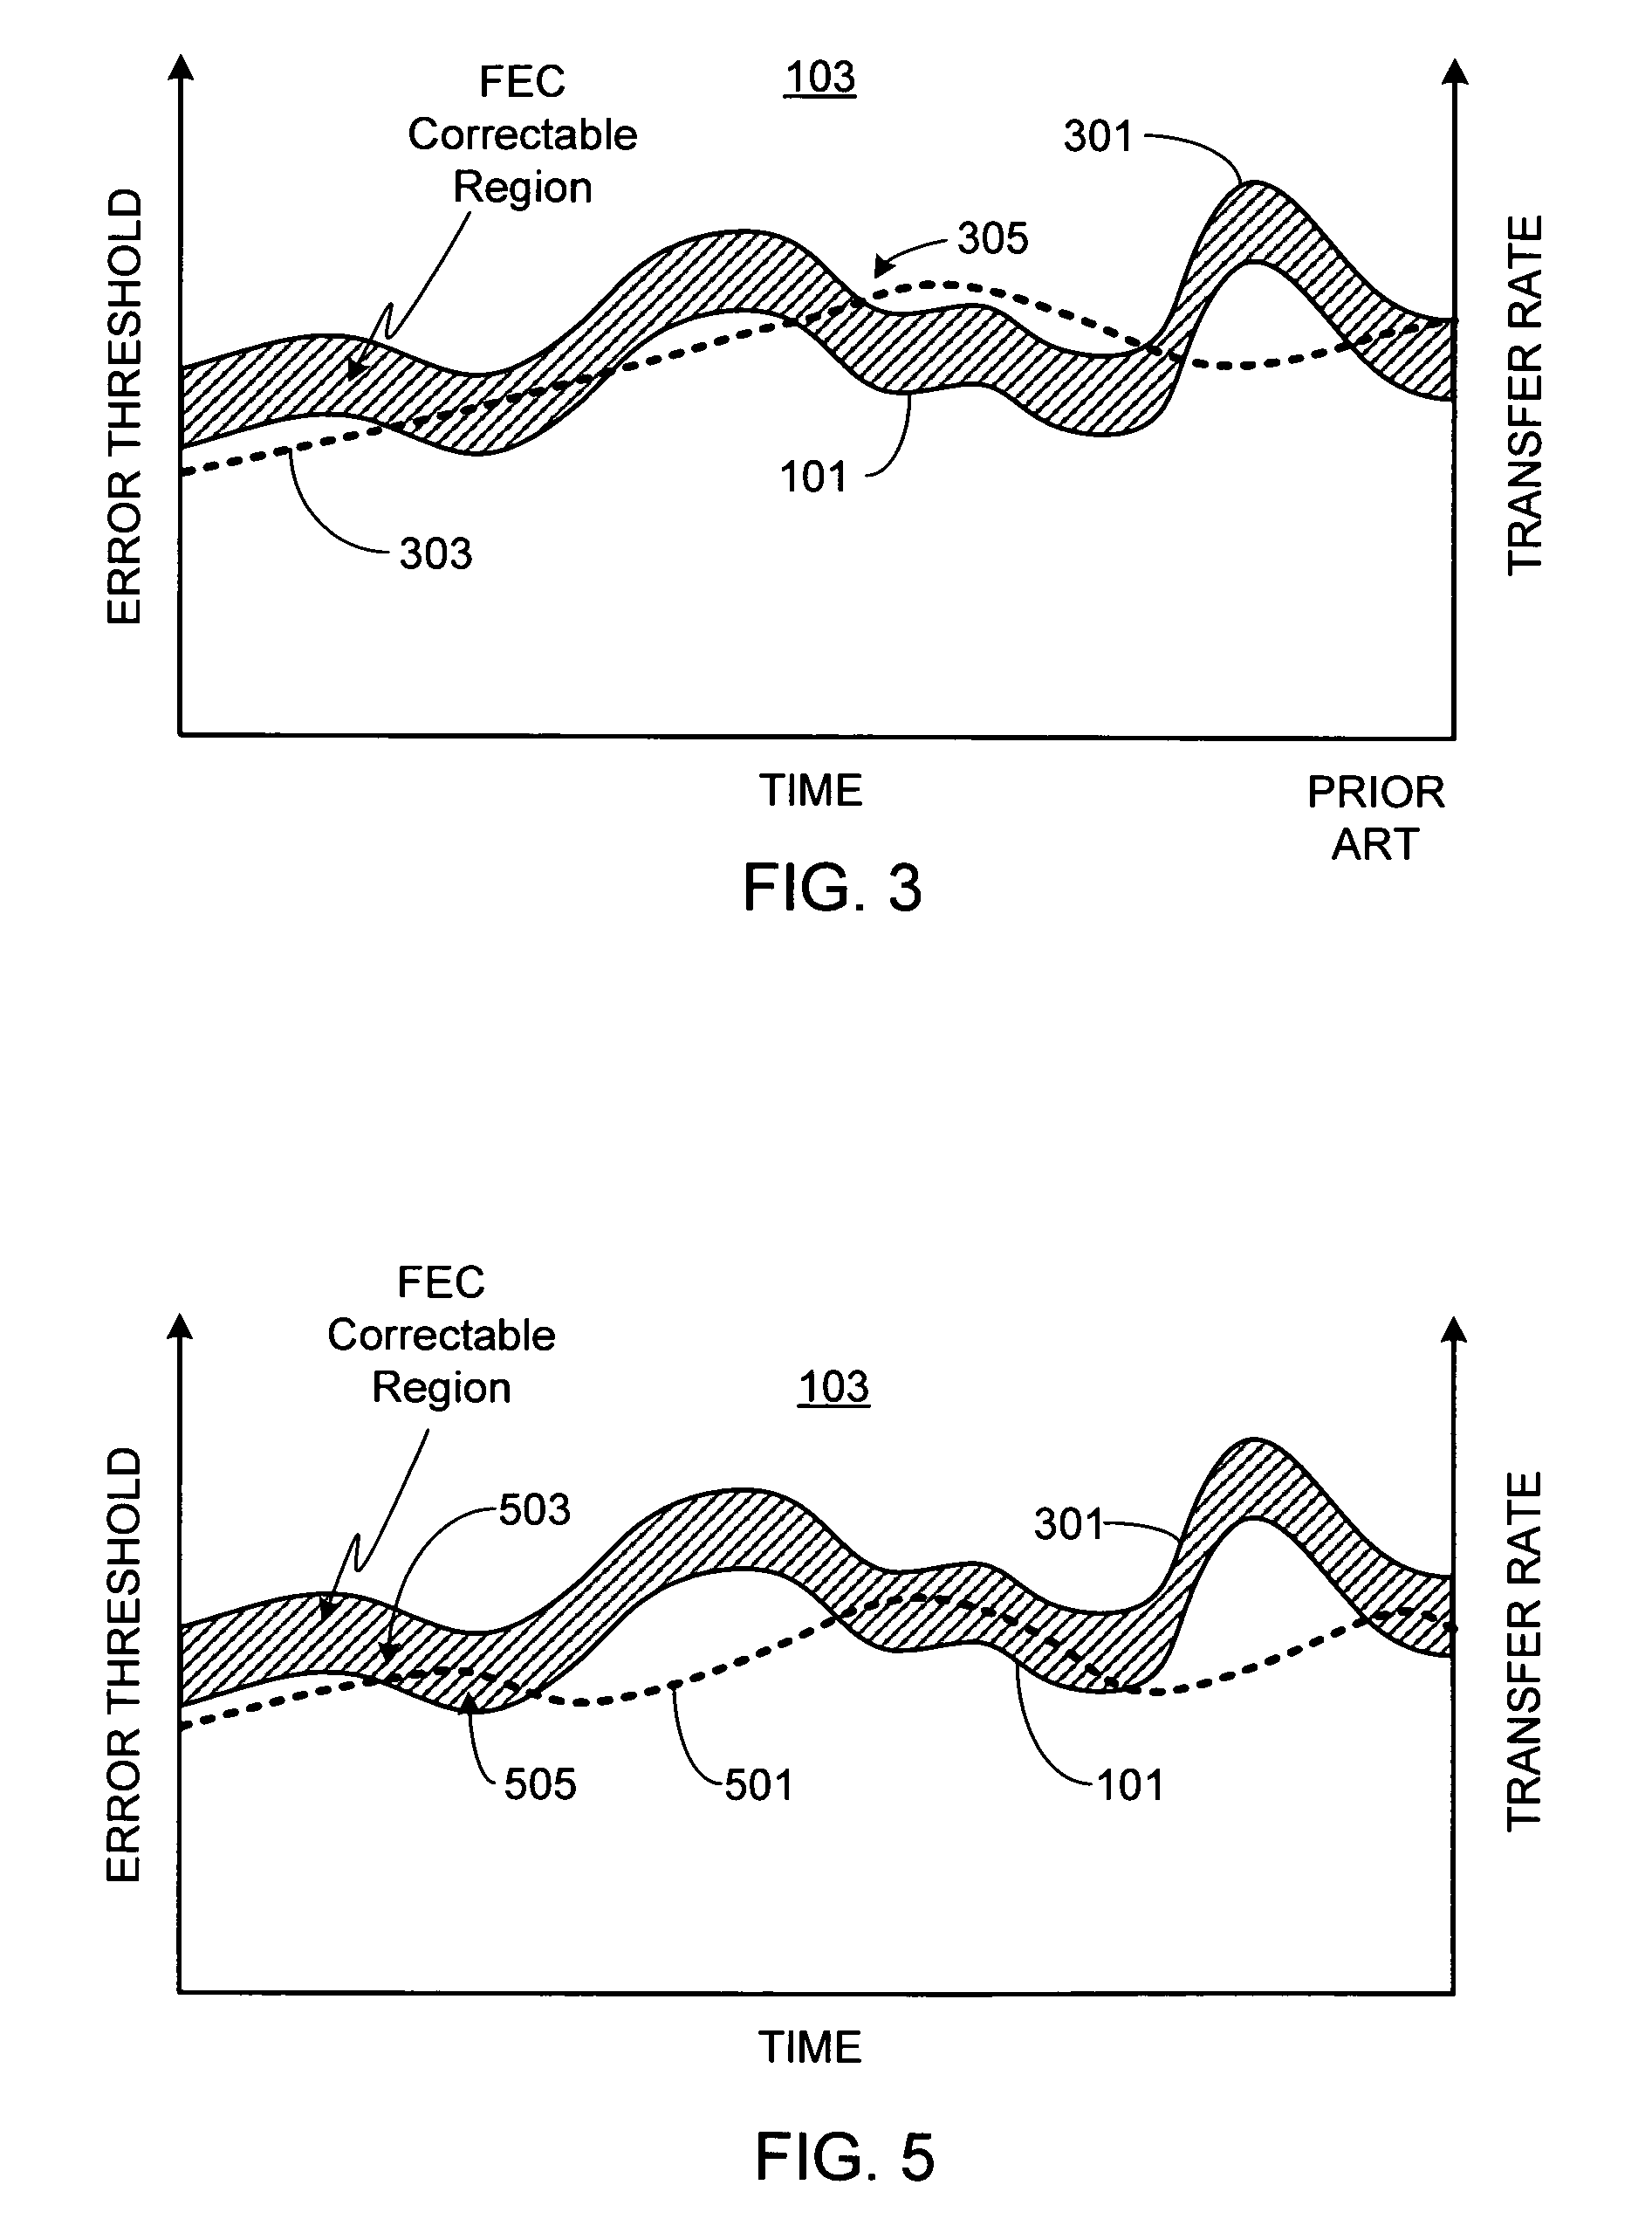 Adaptive information delivery system using FEC feedback